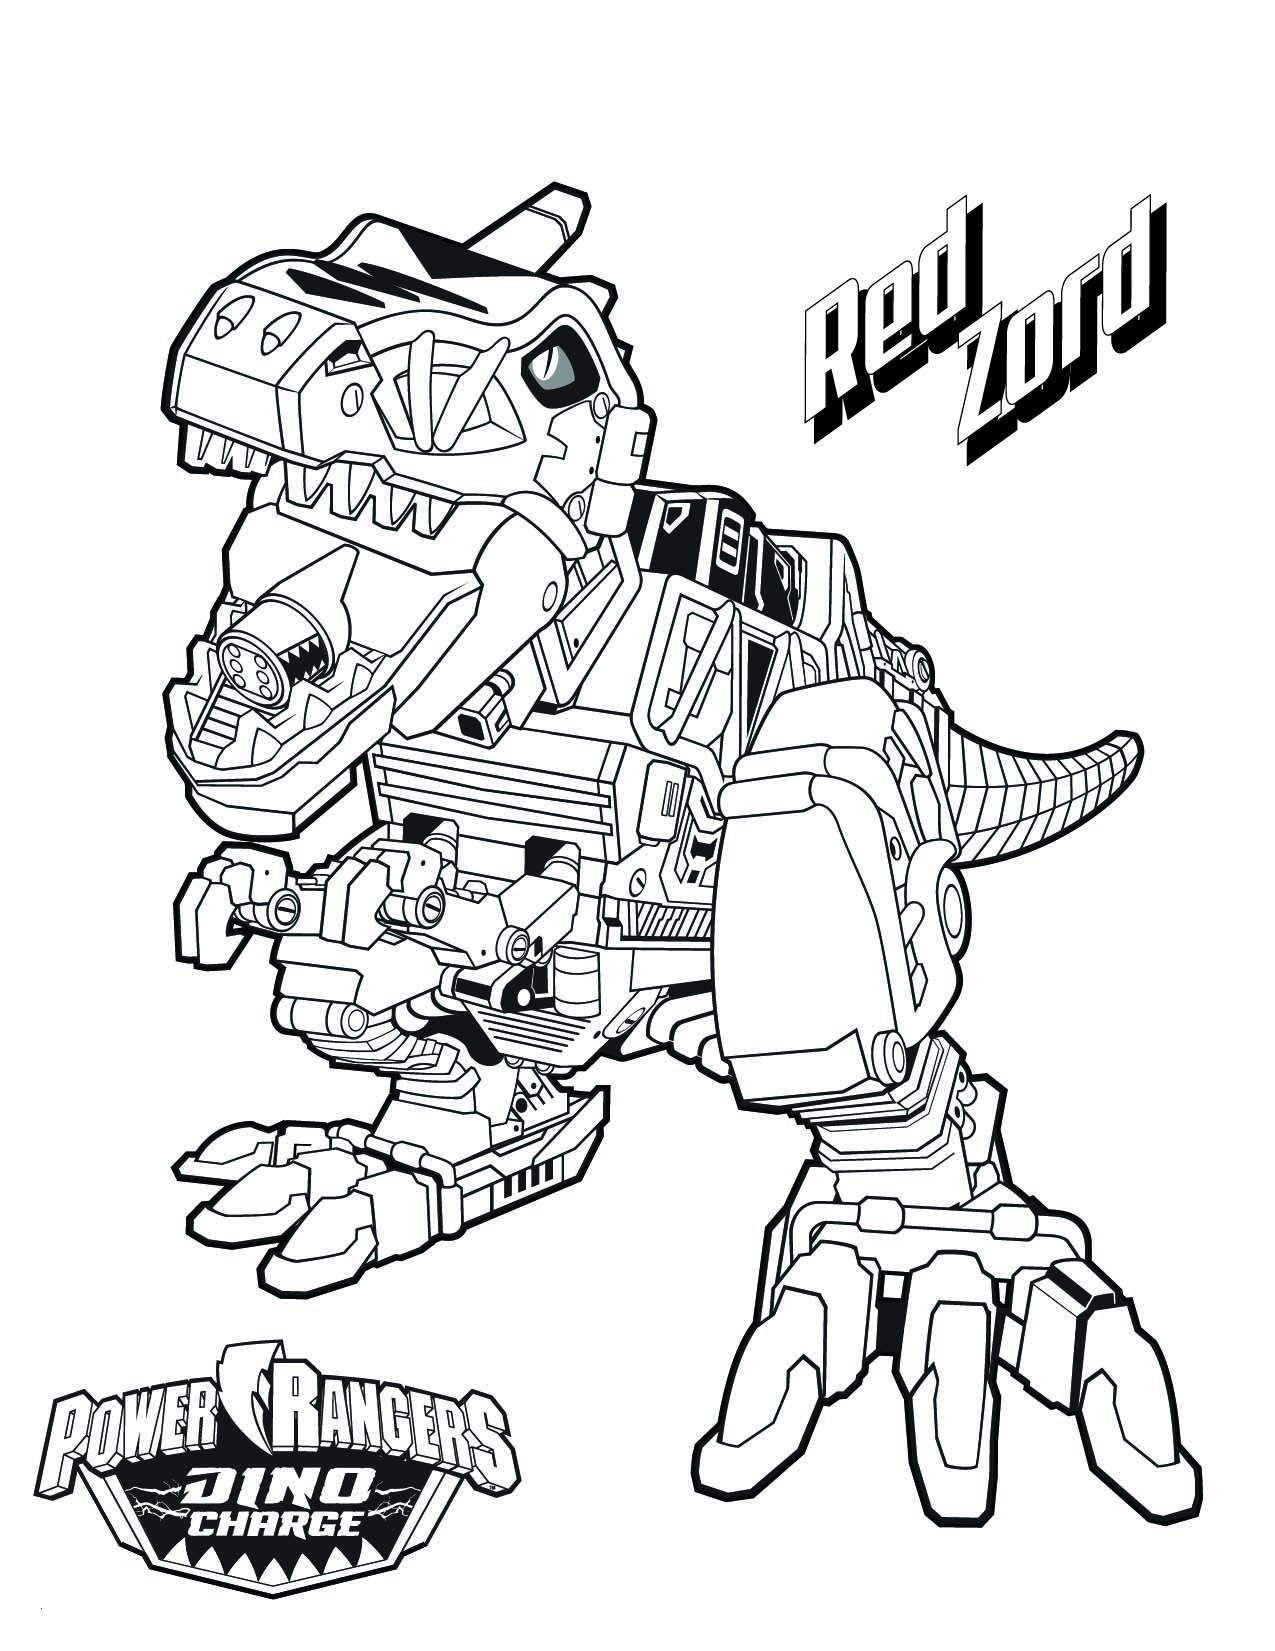 Dino Rangers Coloring Pages Wallpaper